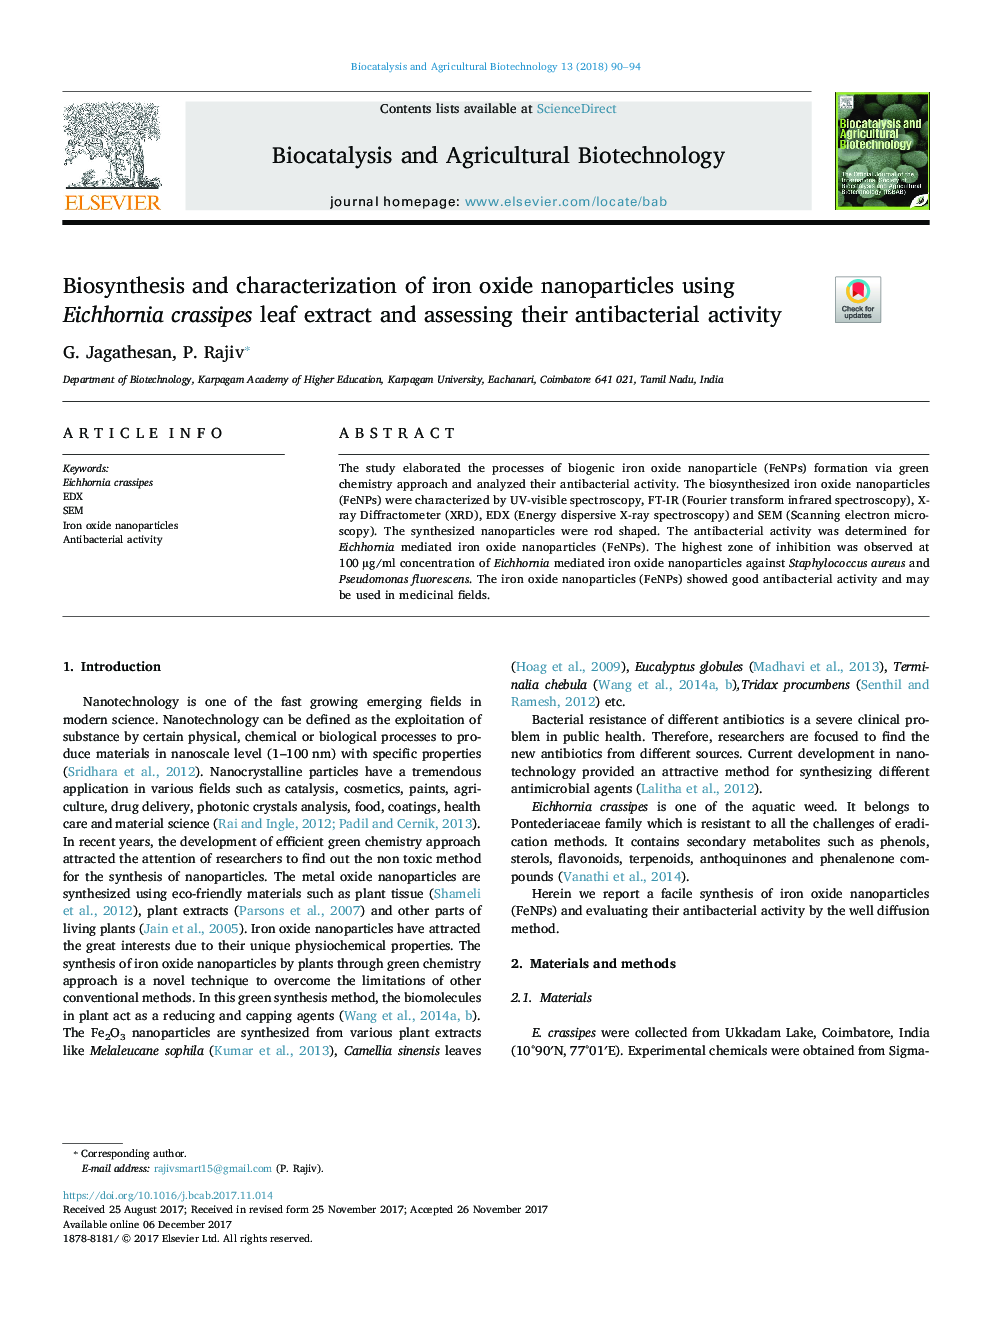 Biosynthesis and characterization of iron oxide nanoparticles using Eichhornia crassipes leaf extract and assessing their antibacterial activity